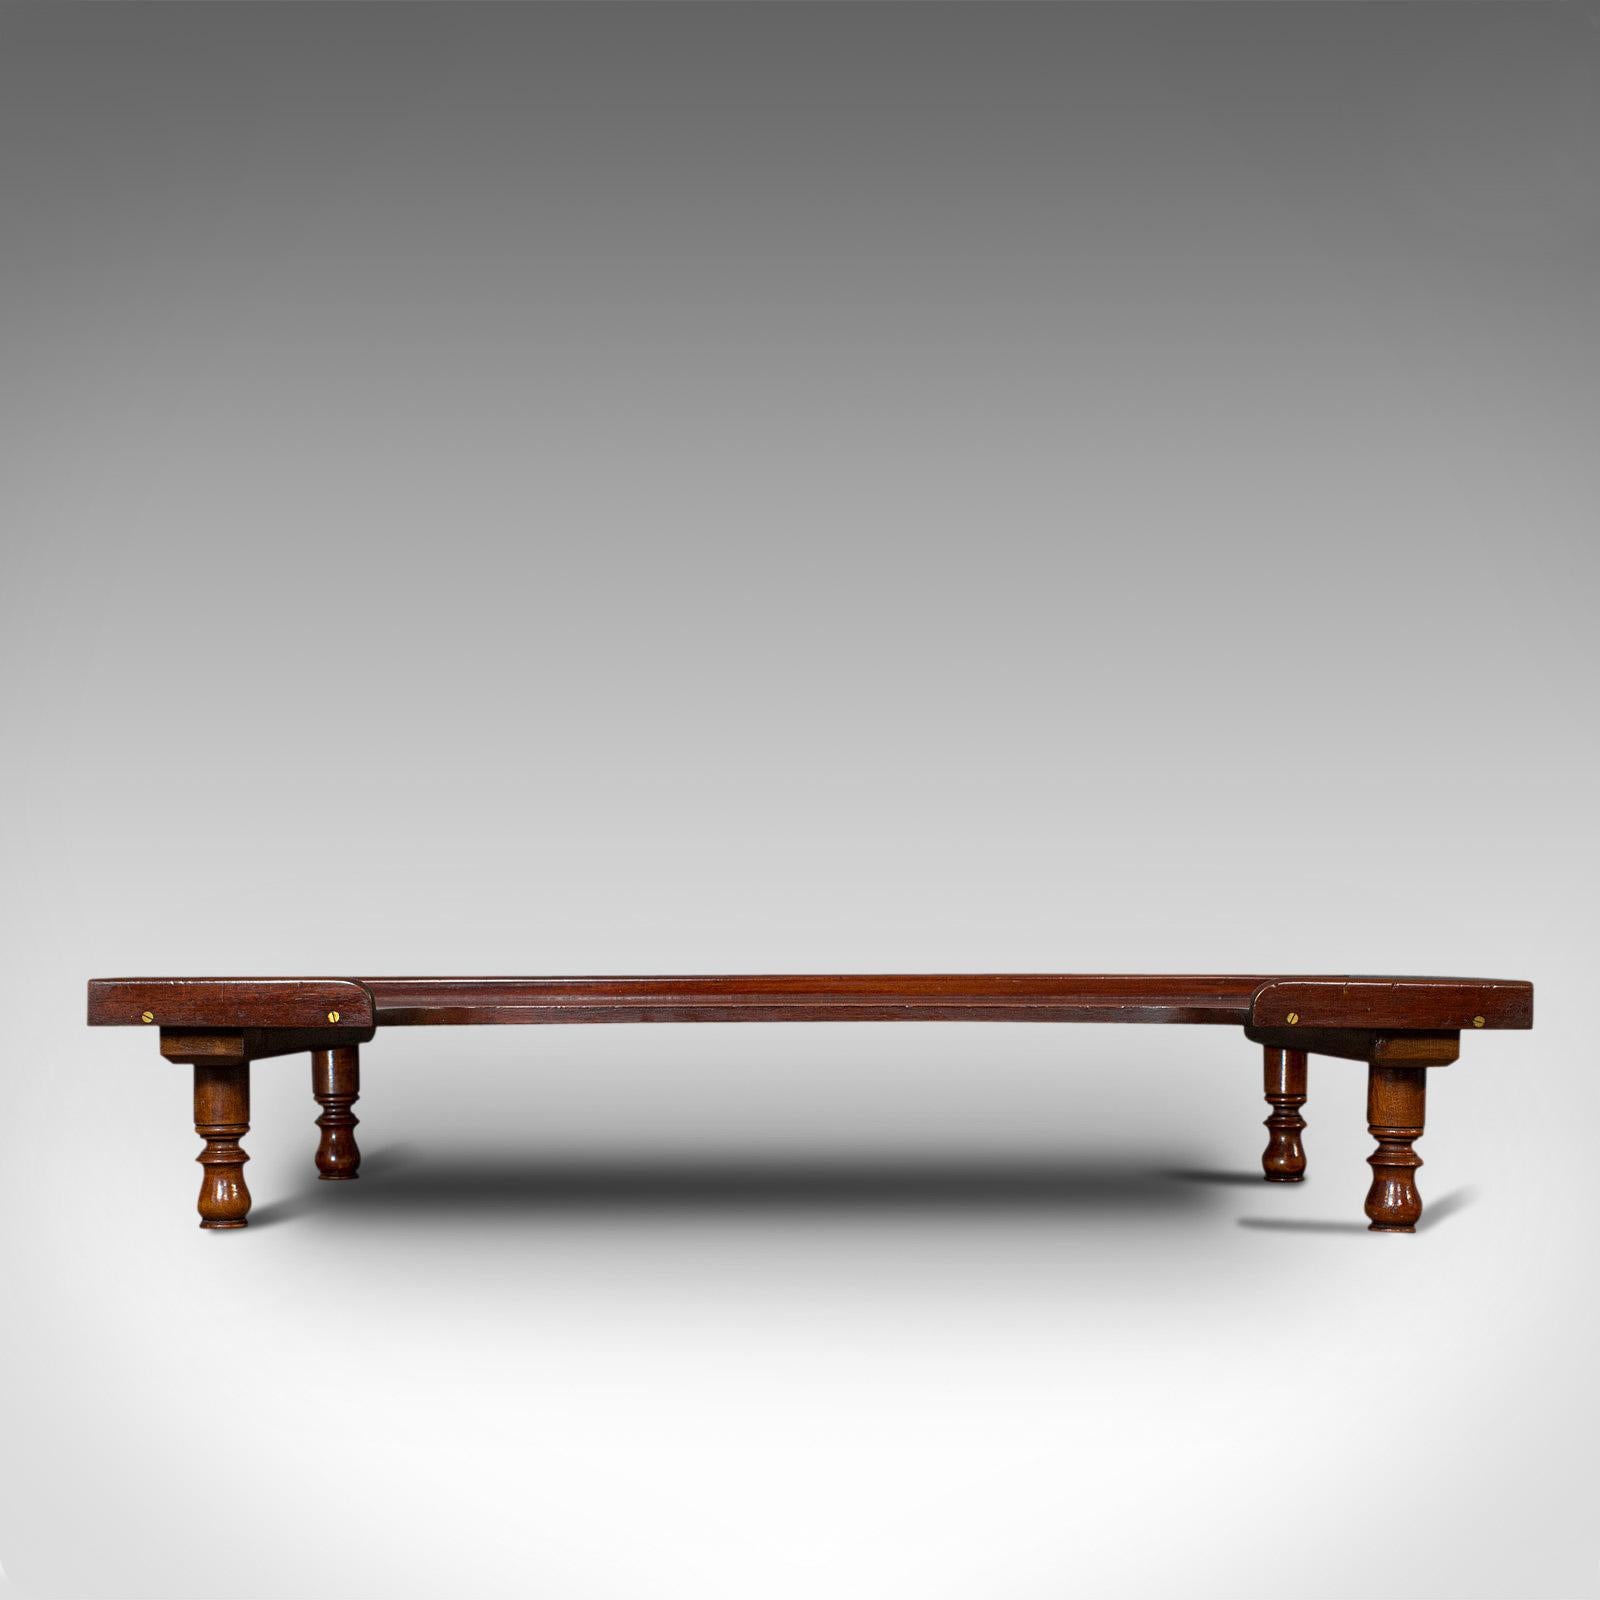 This is an antique lap tray. An English, mahogany bedtime or breakfast table, dating to the mid Victorian period, circa 1860.

Attractive bedroom table
Displays a desirable aged patina
Select mahogany shows Fine grain interest
Eye-catching,